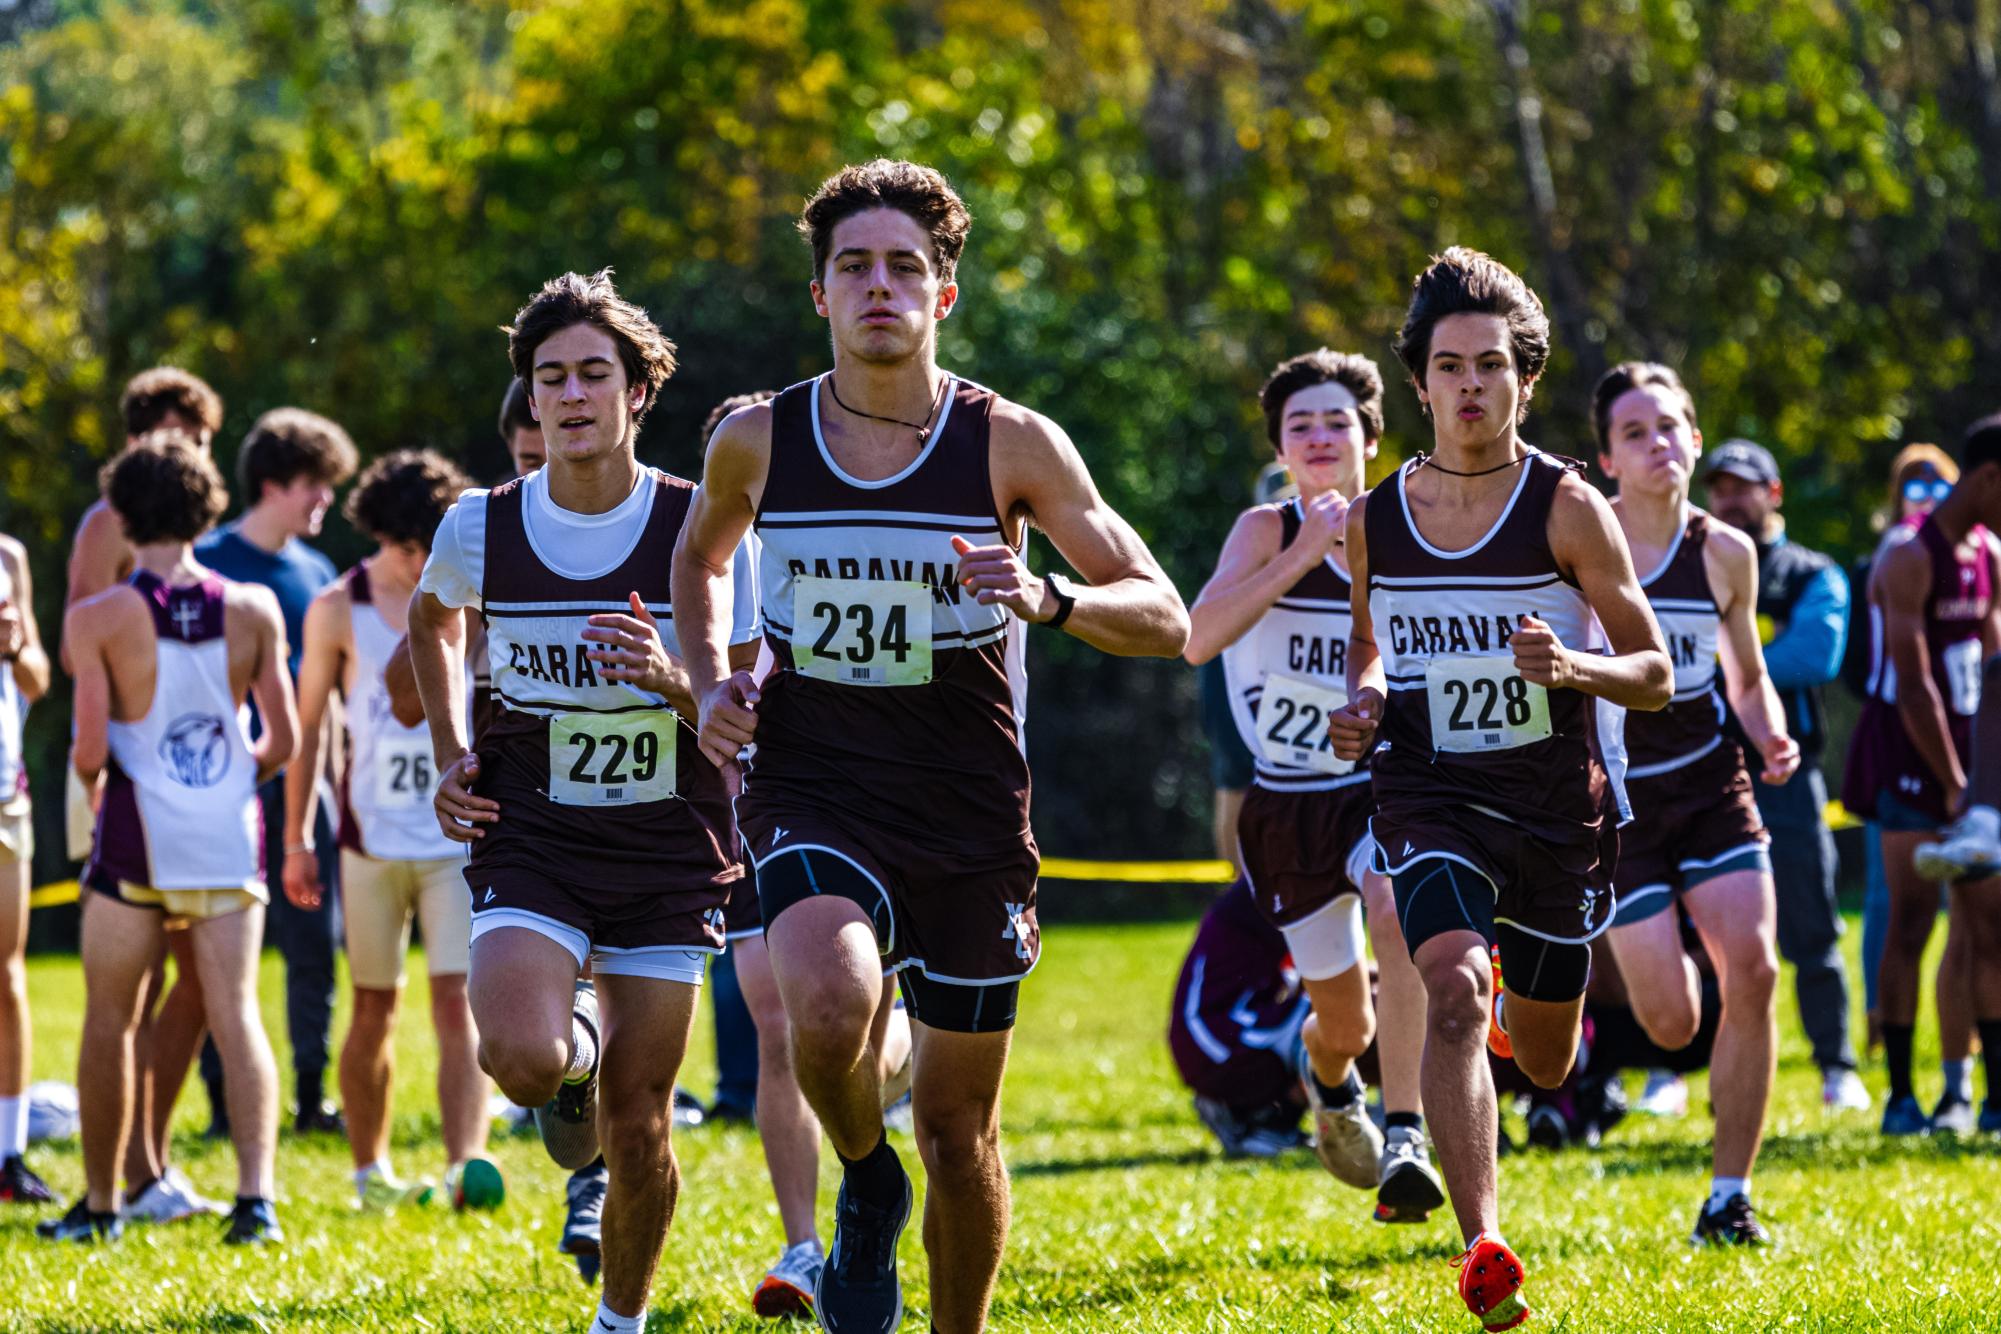 Junior Chirstos Dimas leads the pack of Caravan runners at a race this season.